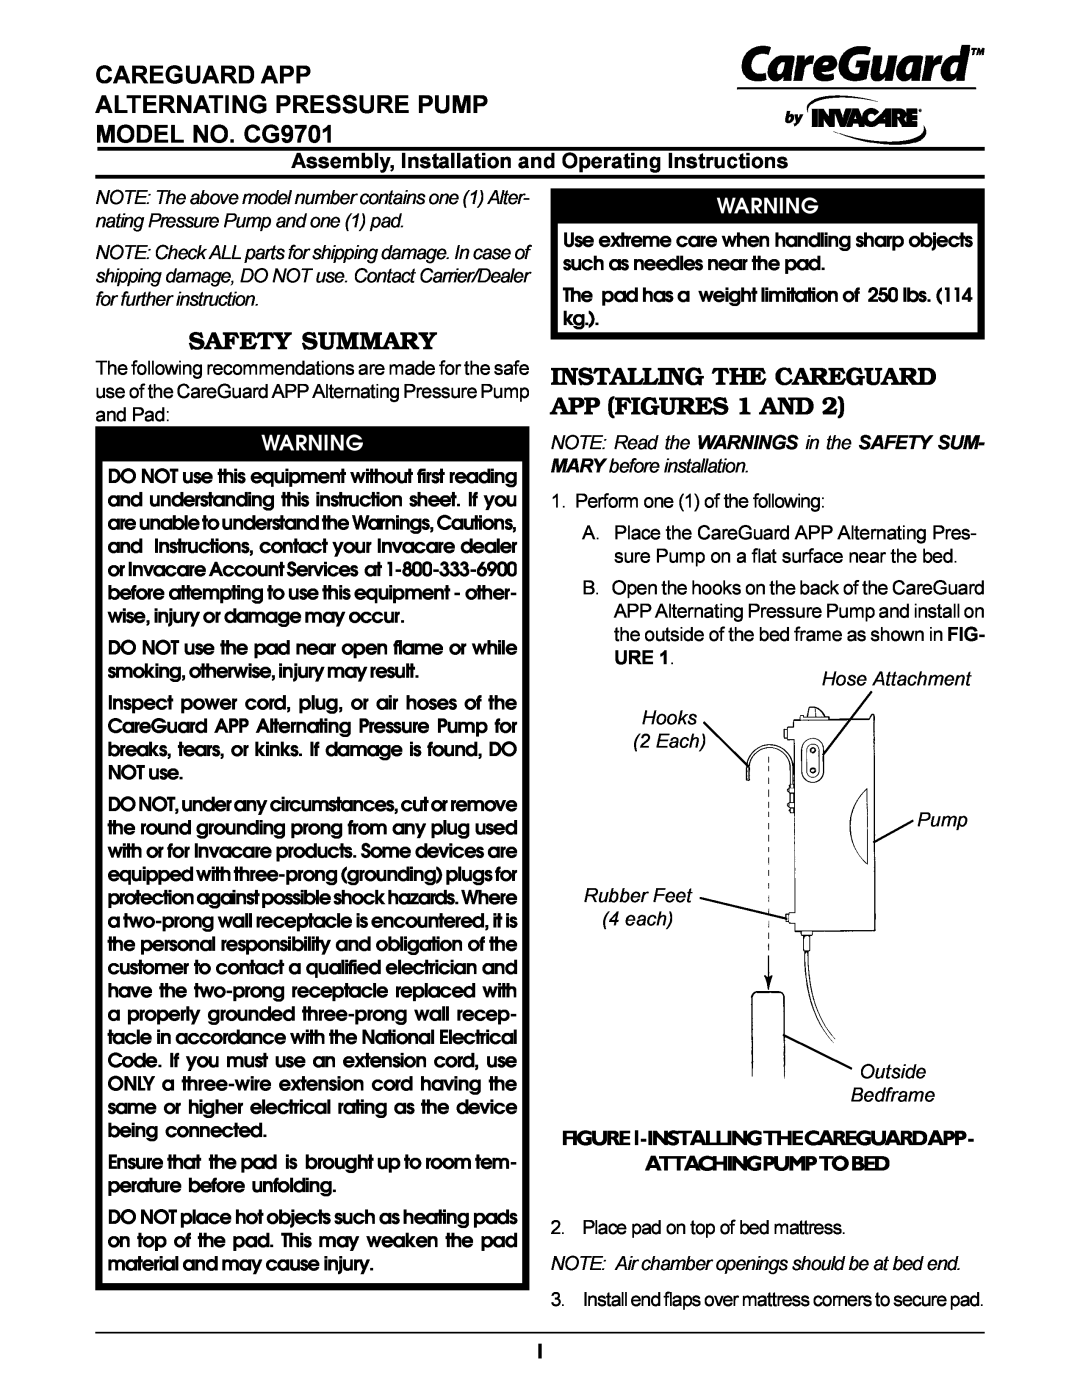 Invacare CG9701 instruction sheet Safety Summary, INSTALLING THE CAREGUARD APP FIGURES 1 AND 